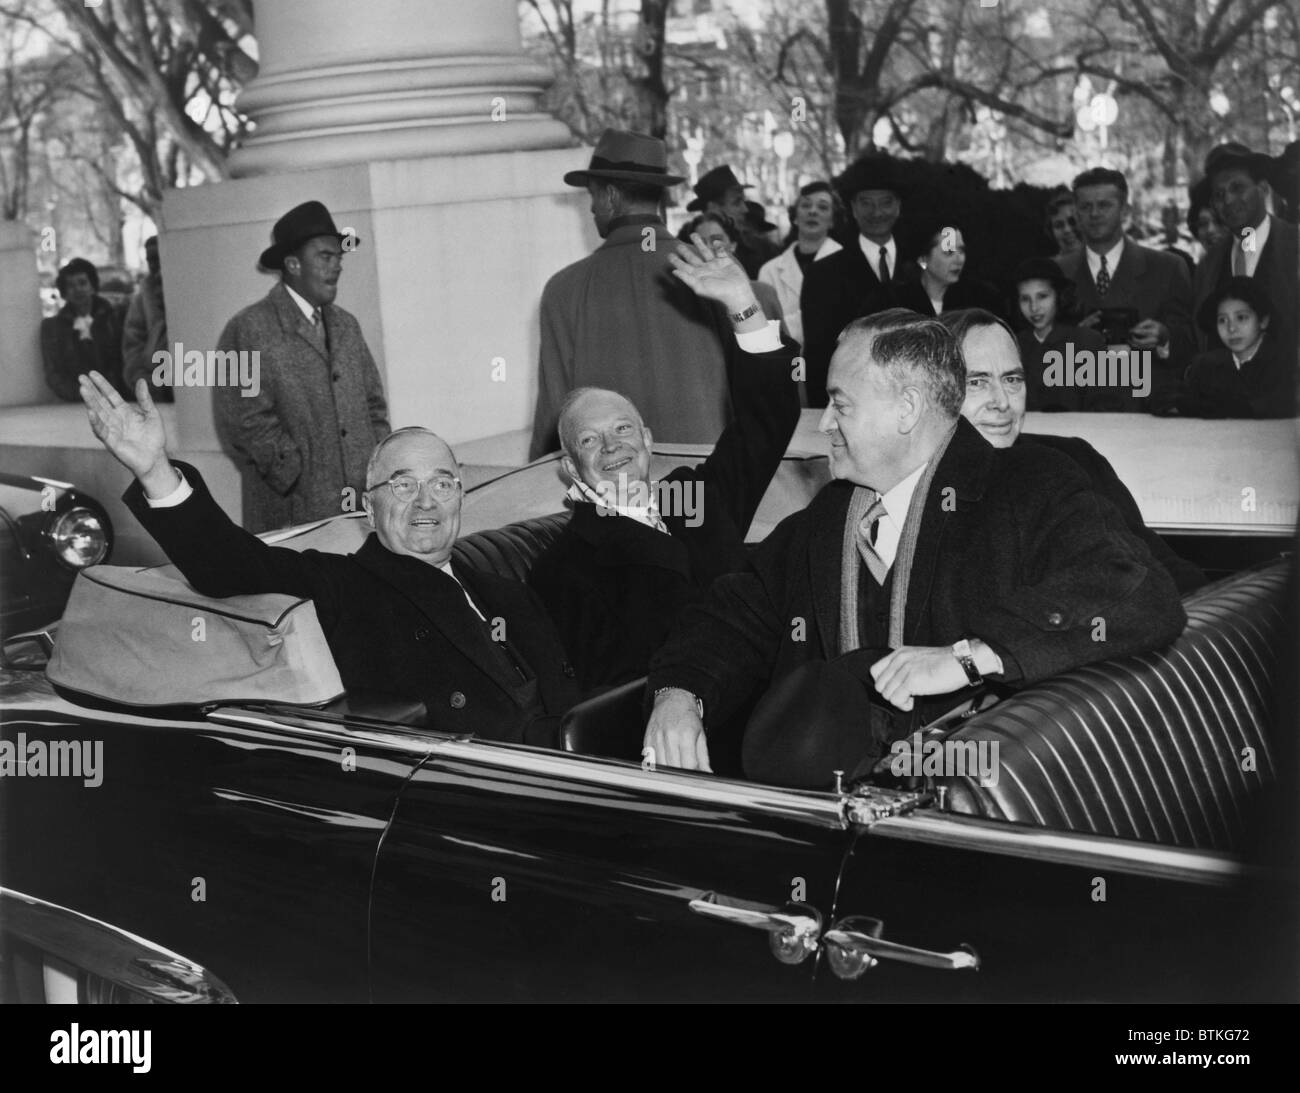 President Harry Truman and his successor, Dwight D. Eisenhower, leave White House in an open car on way to Capitol for inauguration ceremonies. January 20, 1953. Stock Photo